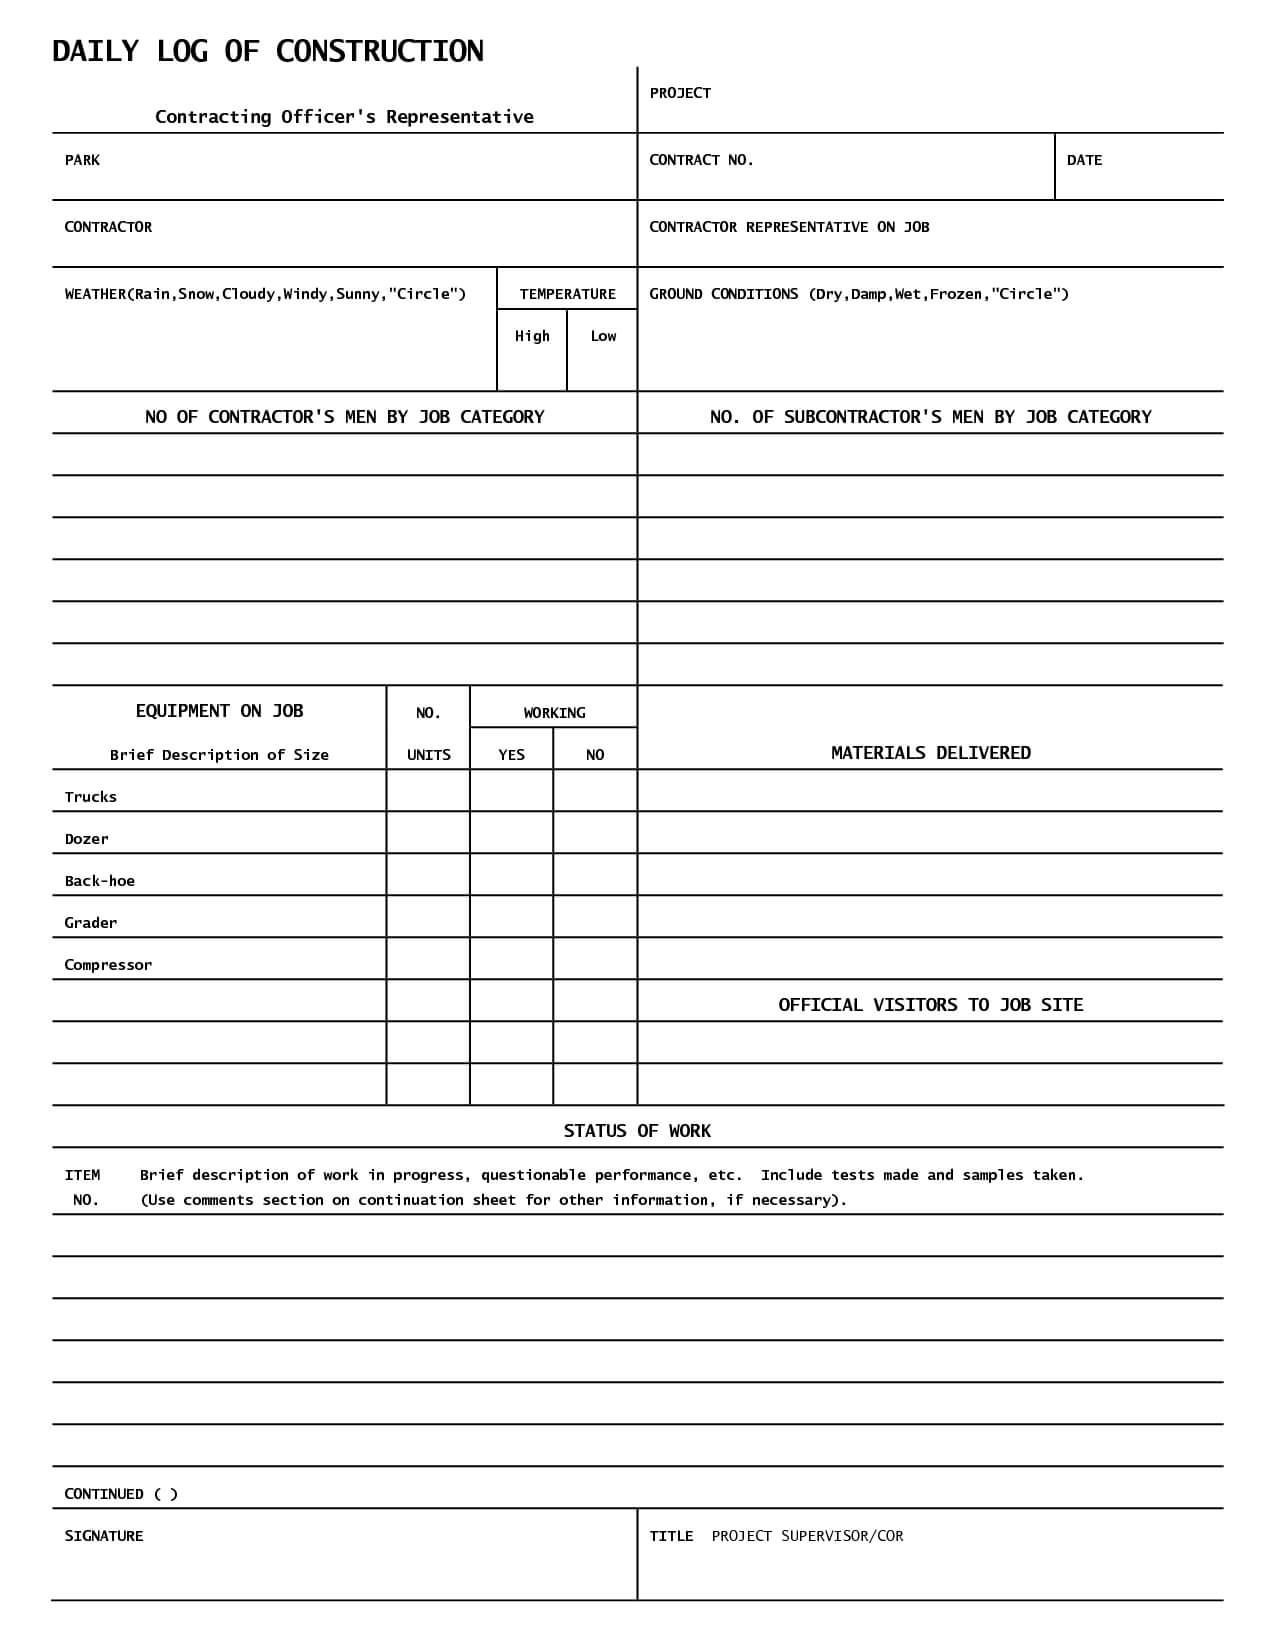 Daily Log Template For Construction – Printable Schedule Throughout Free Construction Daily Report Template